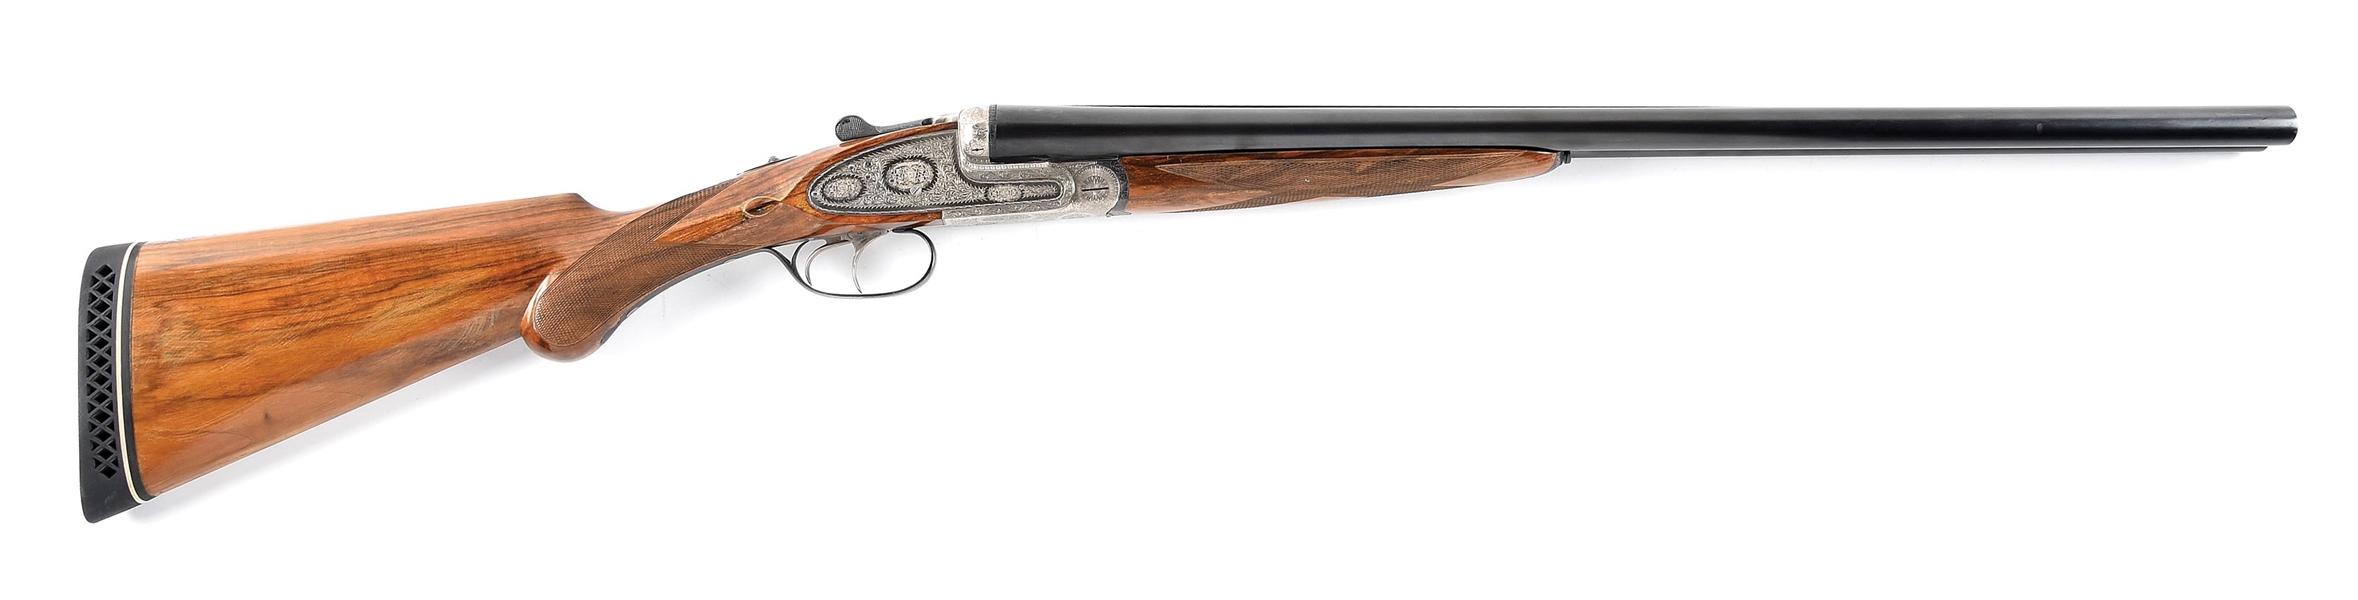 (C) CASED UNION ARMERA MODEL 217RB 12 BORE SIDE BY SIDE SHOTGUN WITH NUMBERED 2 BARREL SET.